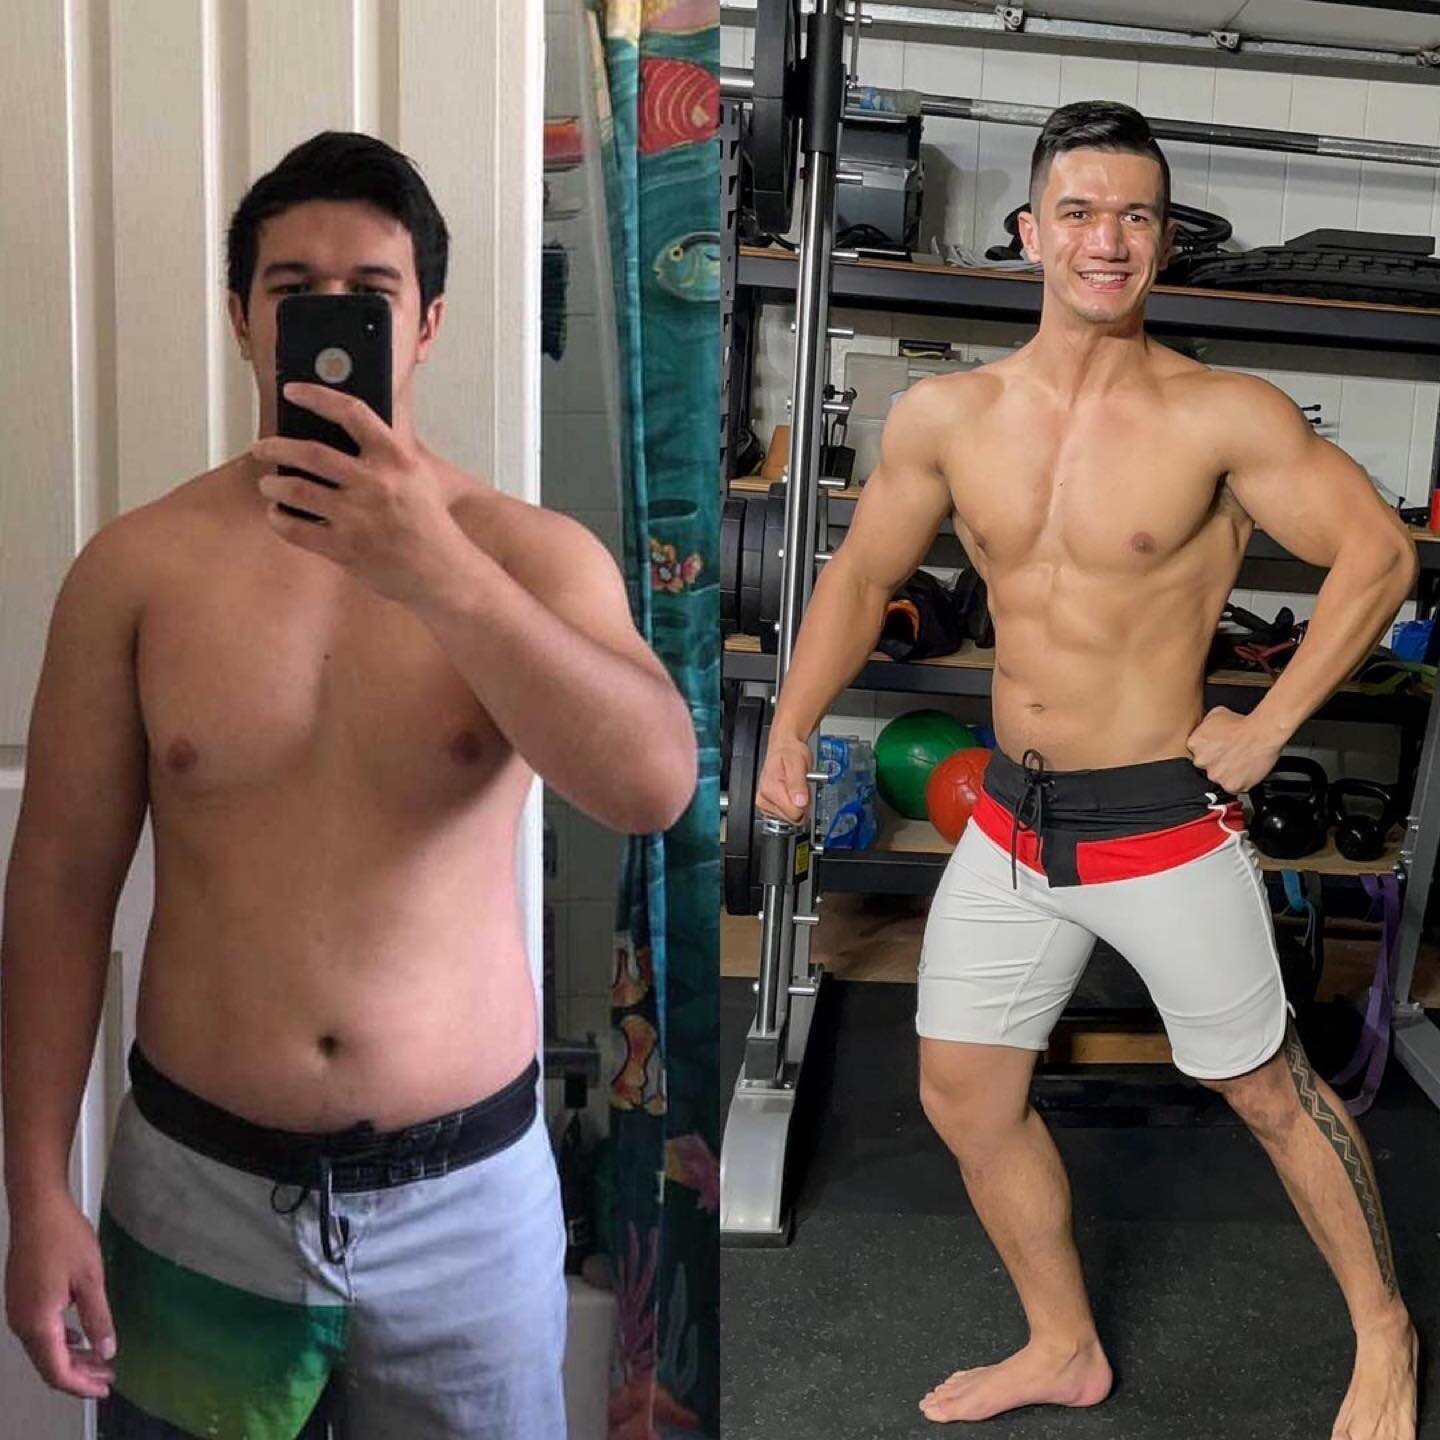 &bull; @bolobuilt_fitness Client @_juanted transformation progress so far at @bolobuilt_fitness 

These picture are about 9 months difference, down about ~33lbs and a lot of added strength and muscle. Ed came to me just wanting to lose some fat and b